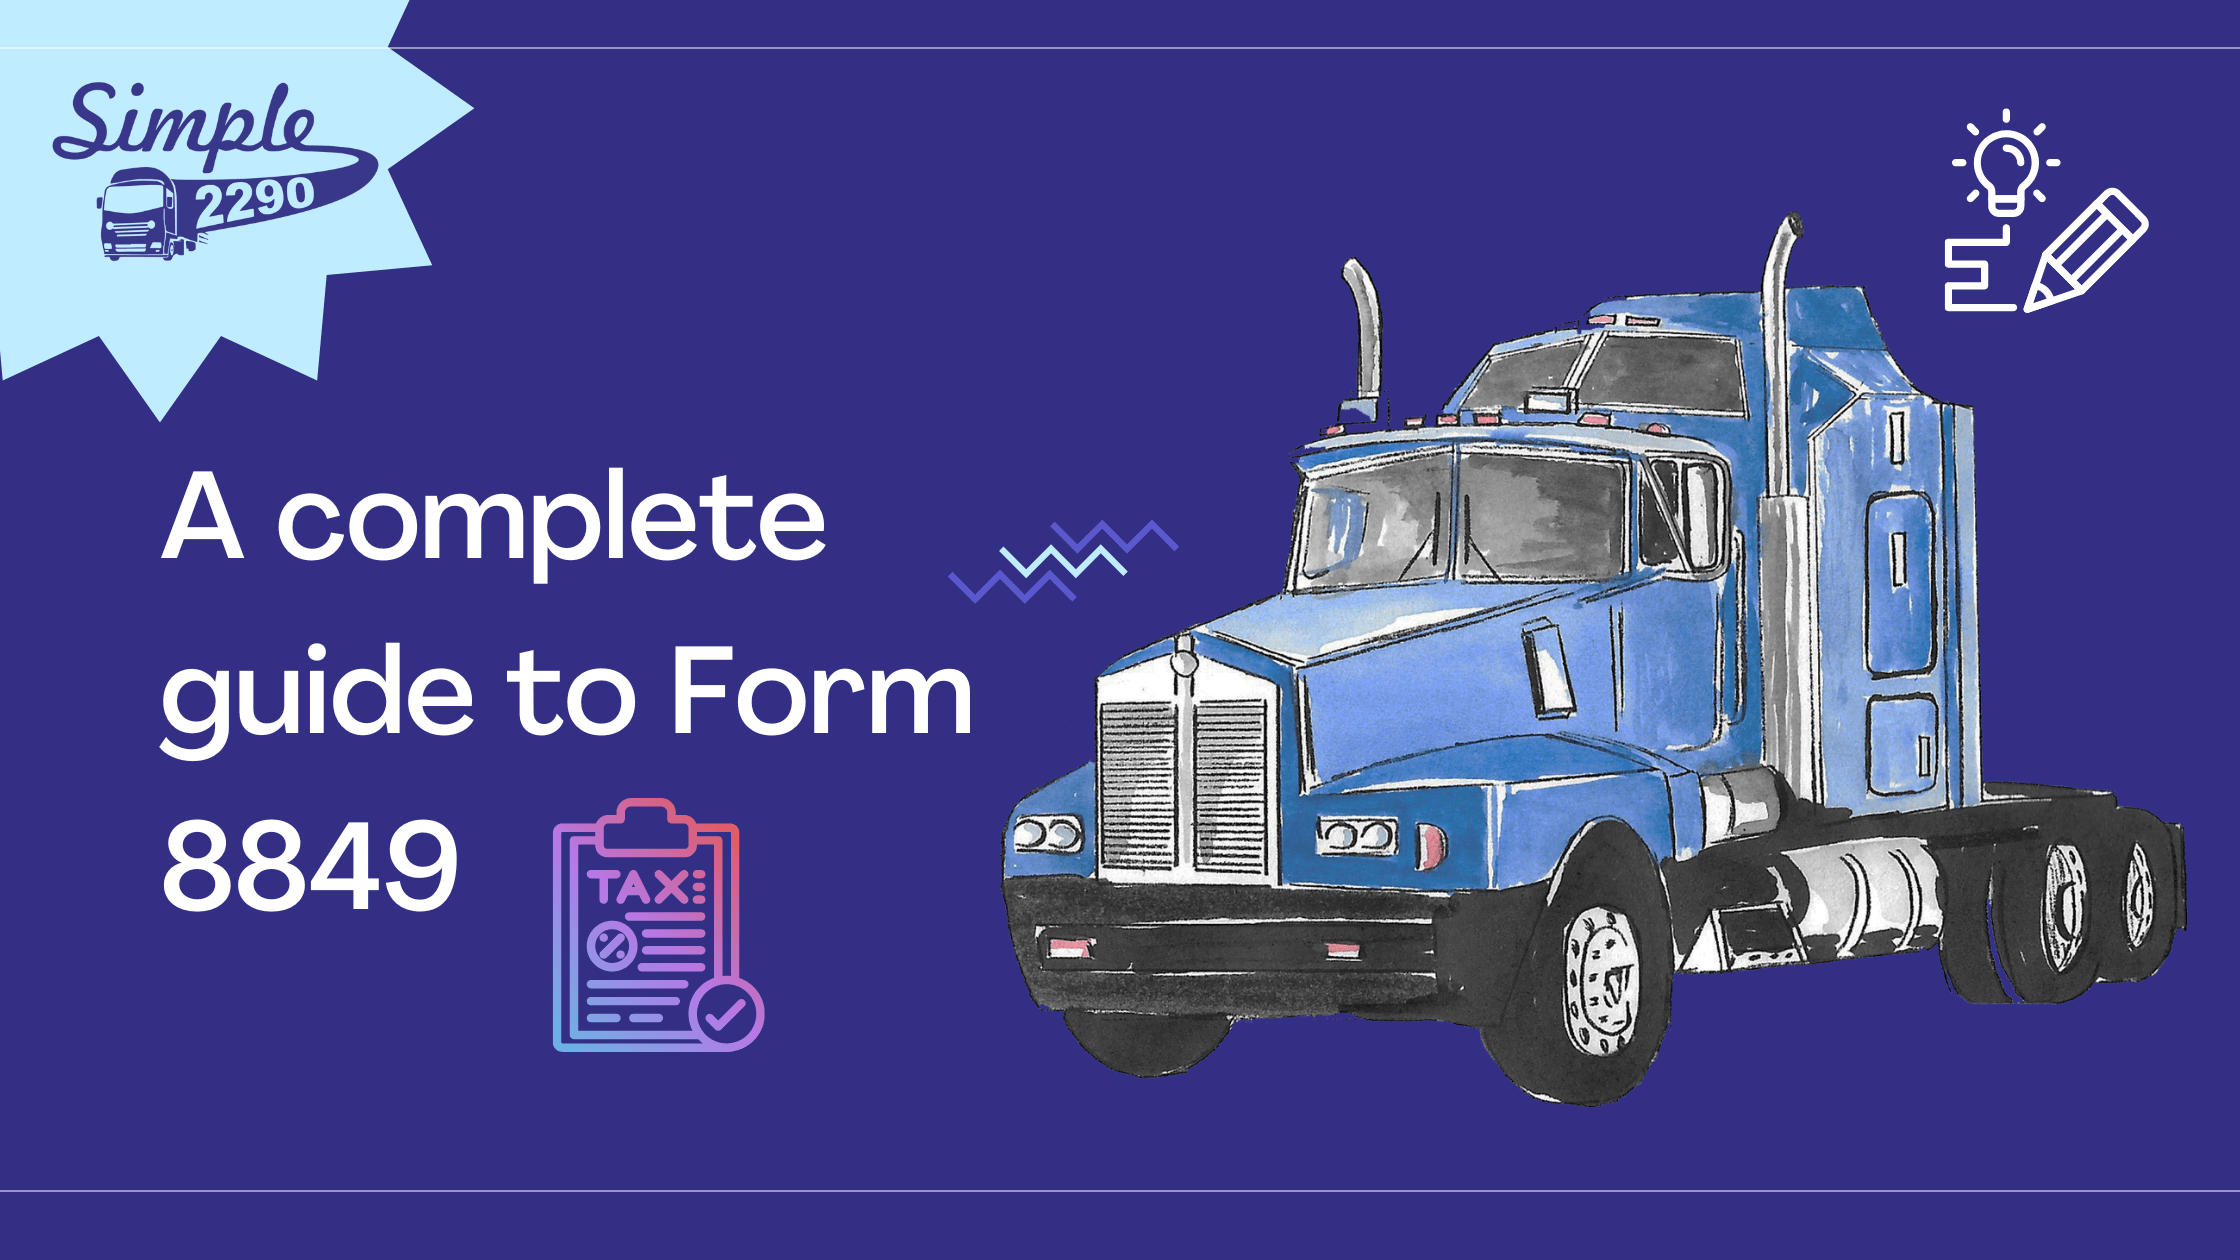 A complete guide to Form 8849